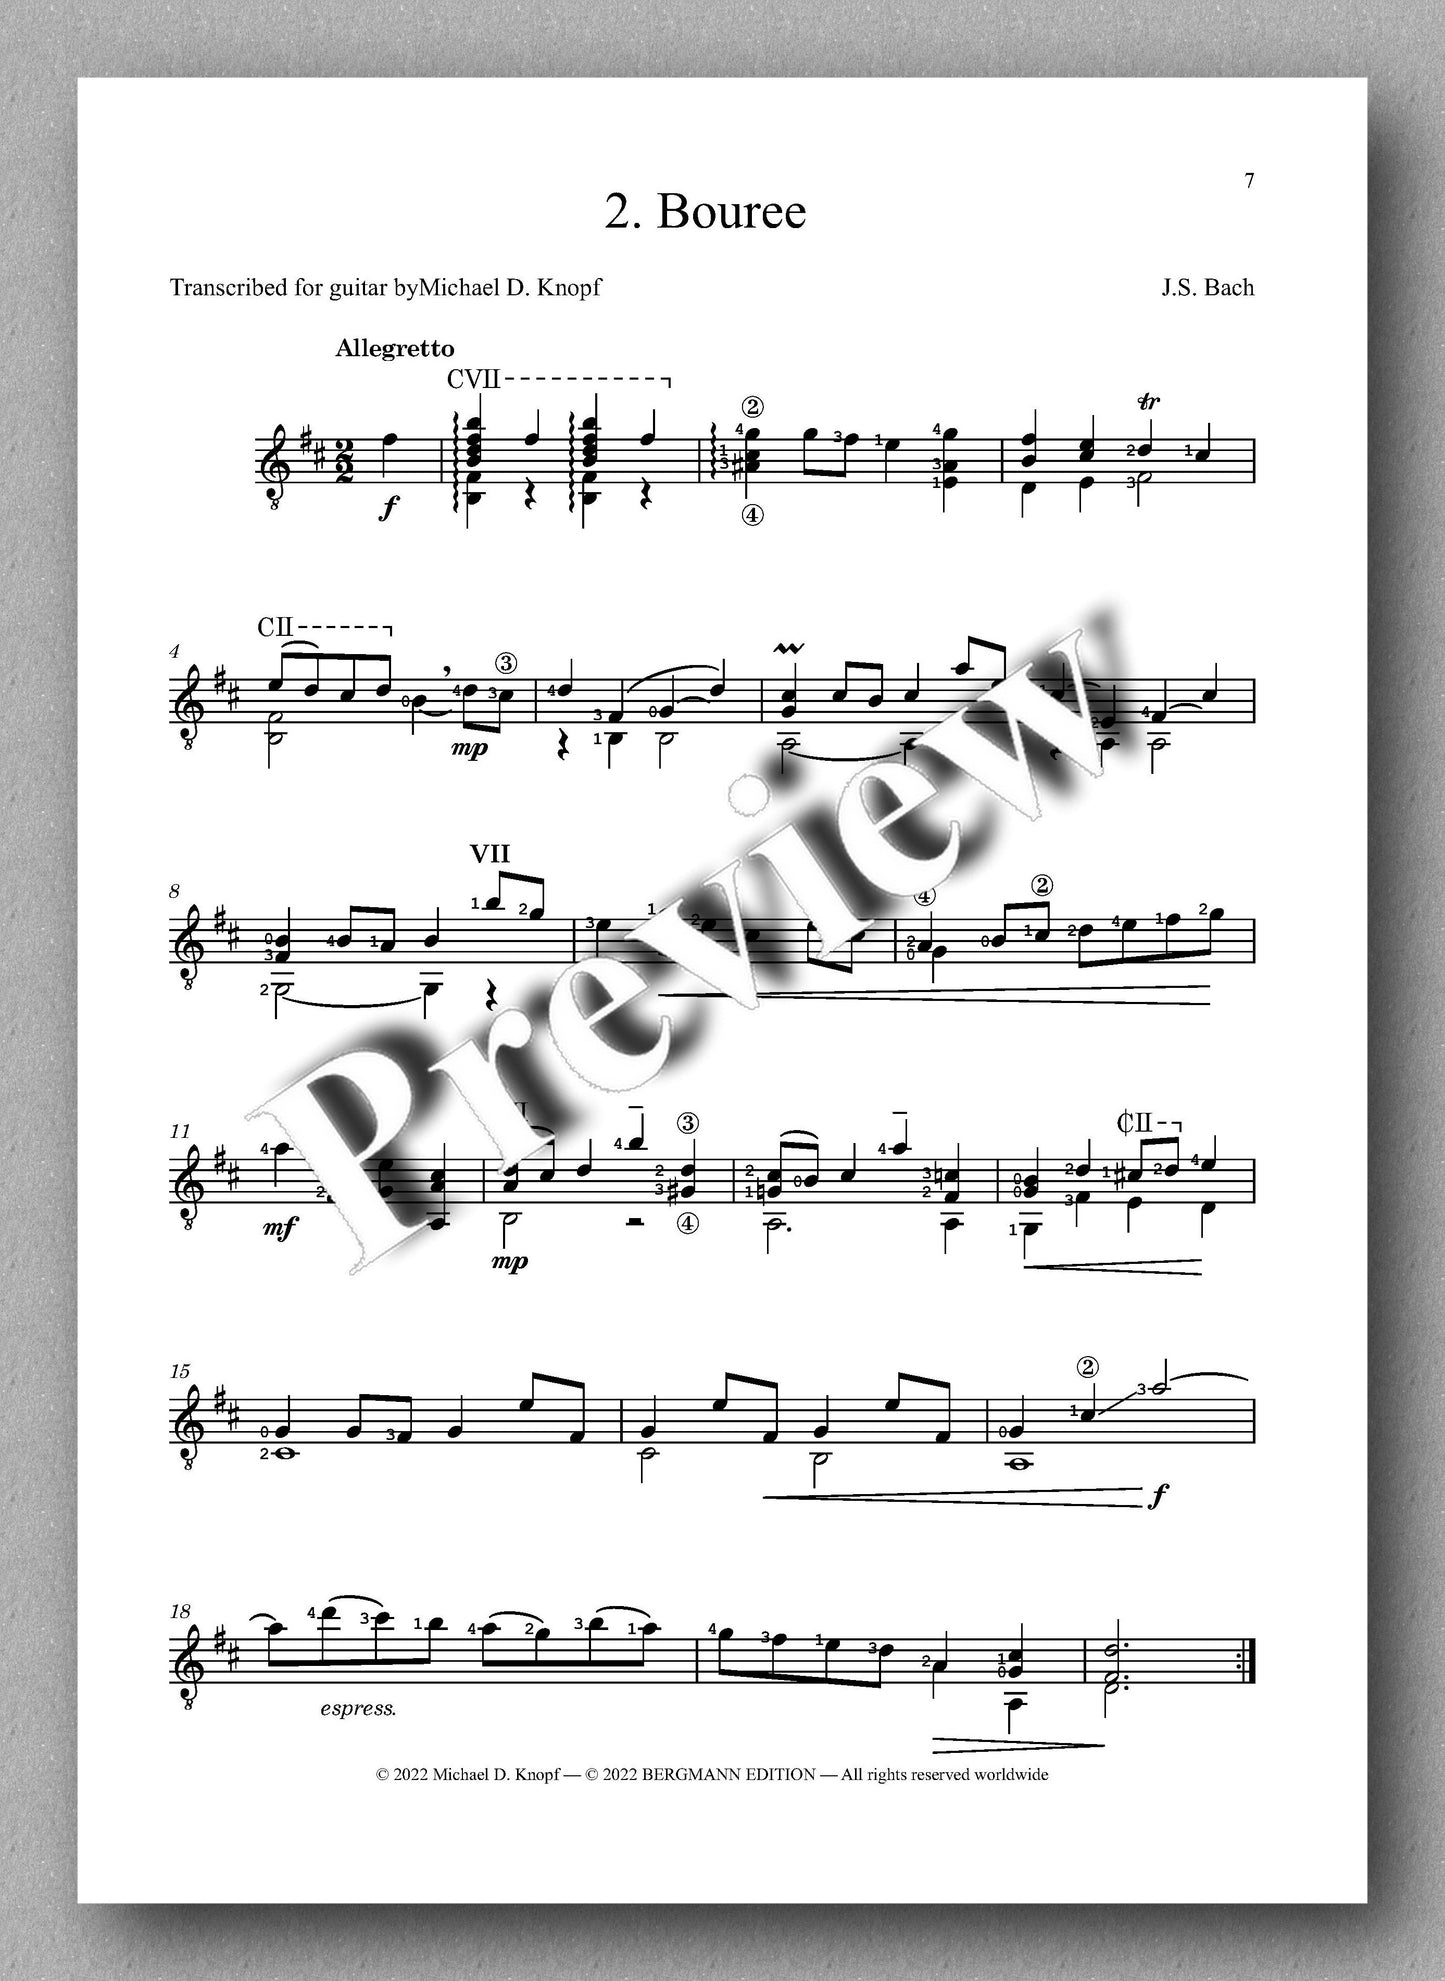 J.S.Bach, Sarabande and Bouree in B-minor, BWV 1002 - preview of the music score 2